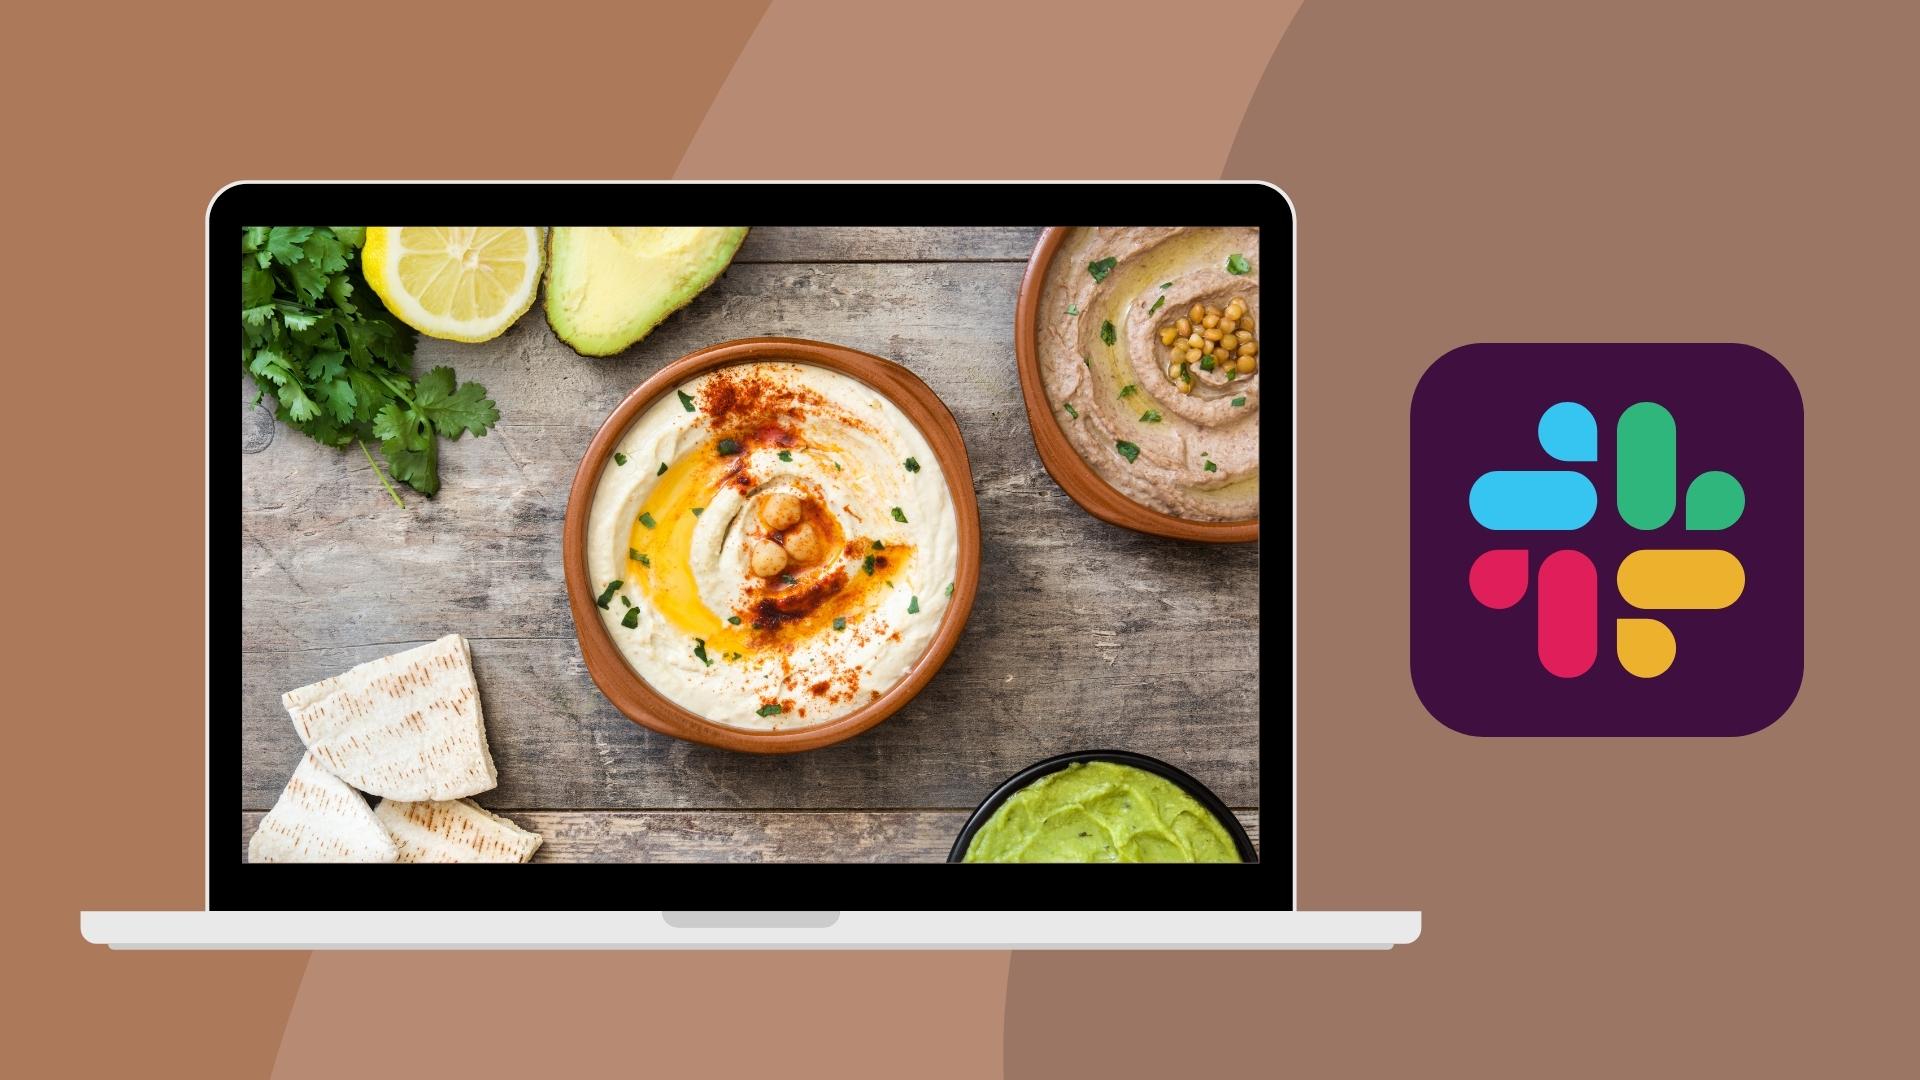 I changed my Slack notifications into hummus, but now I’m hungry for more